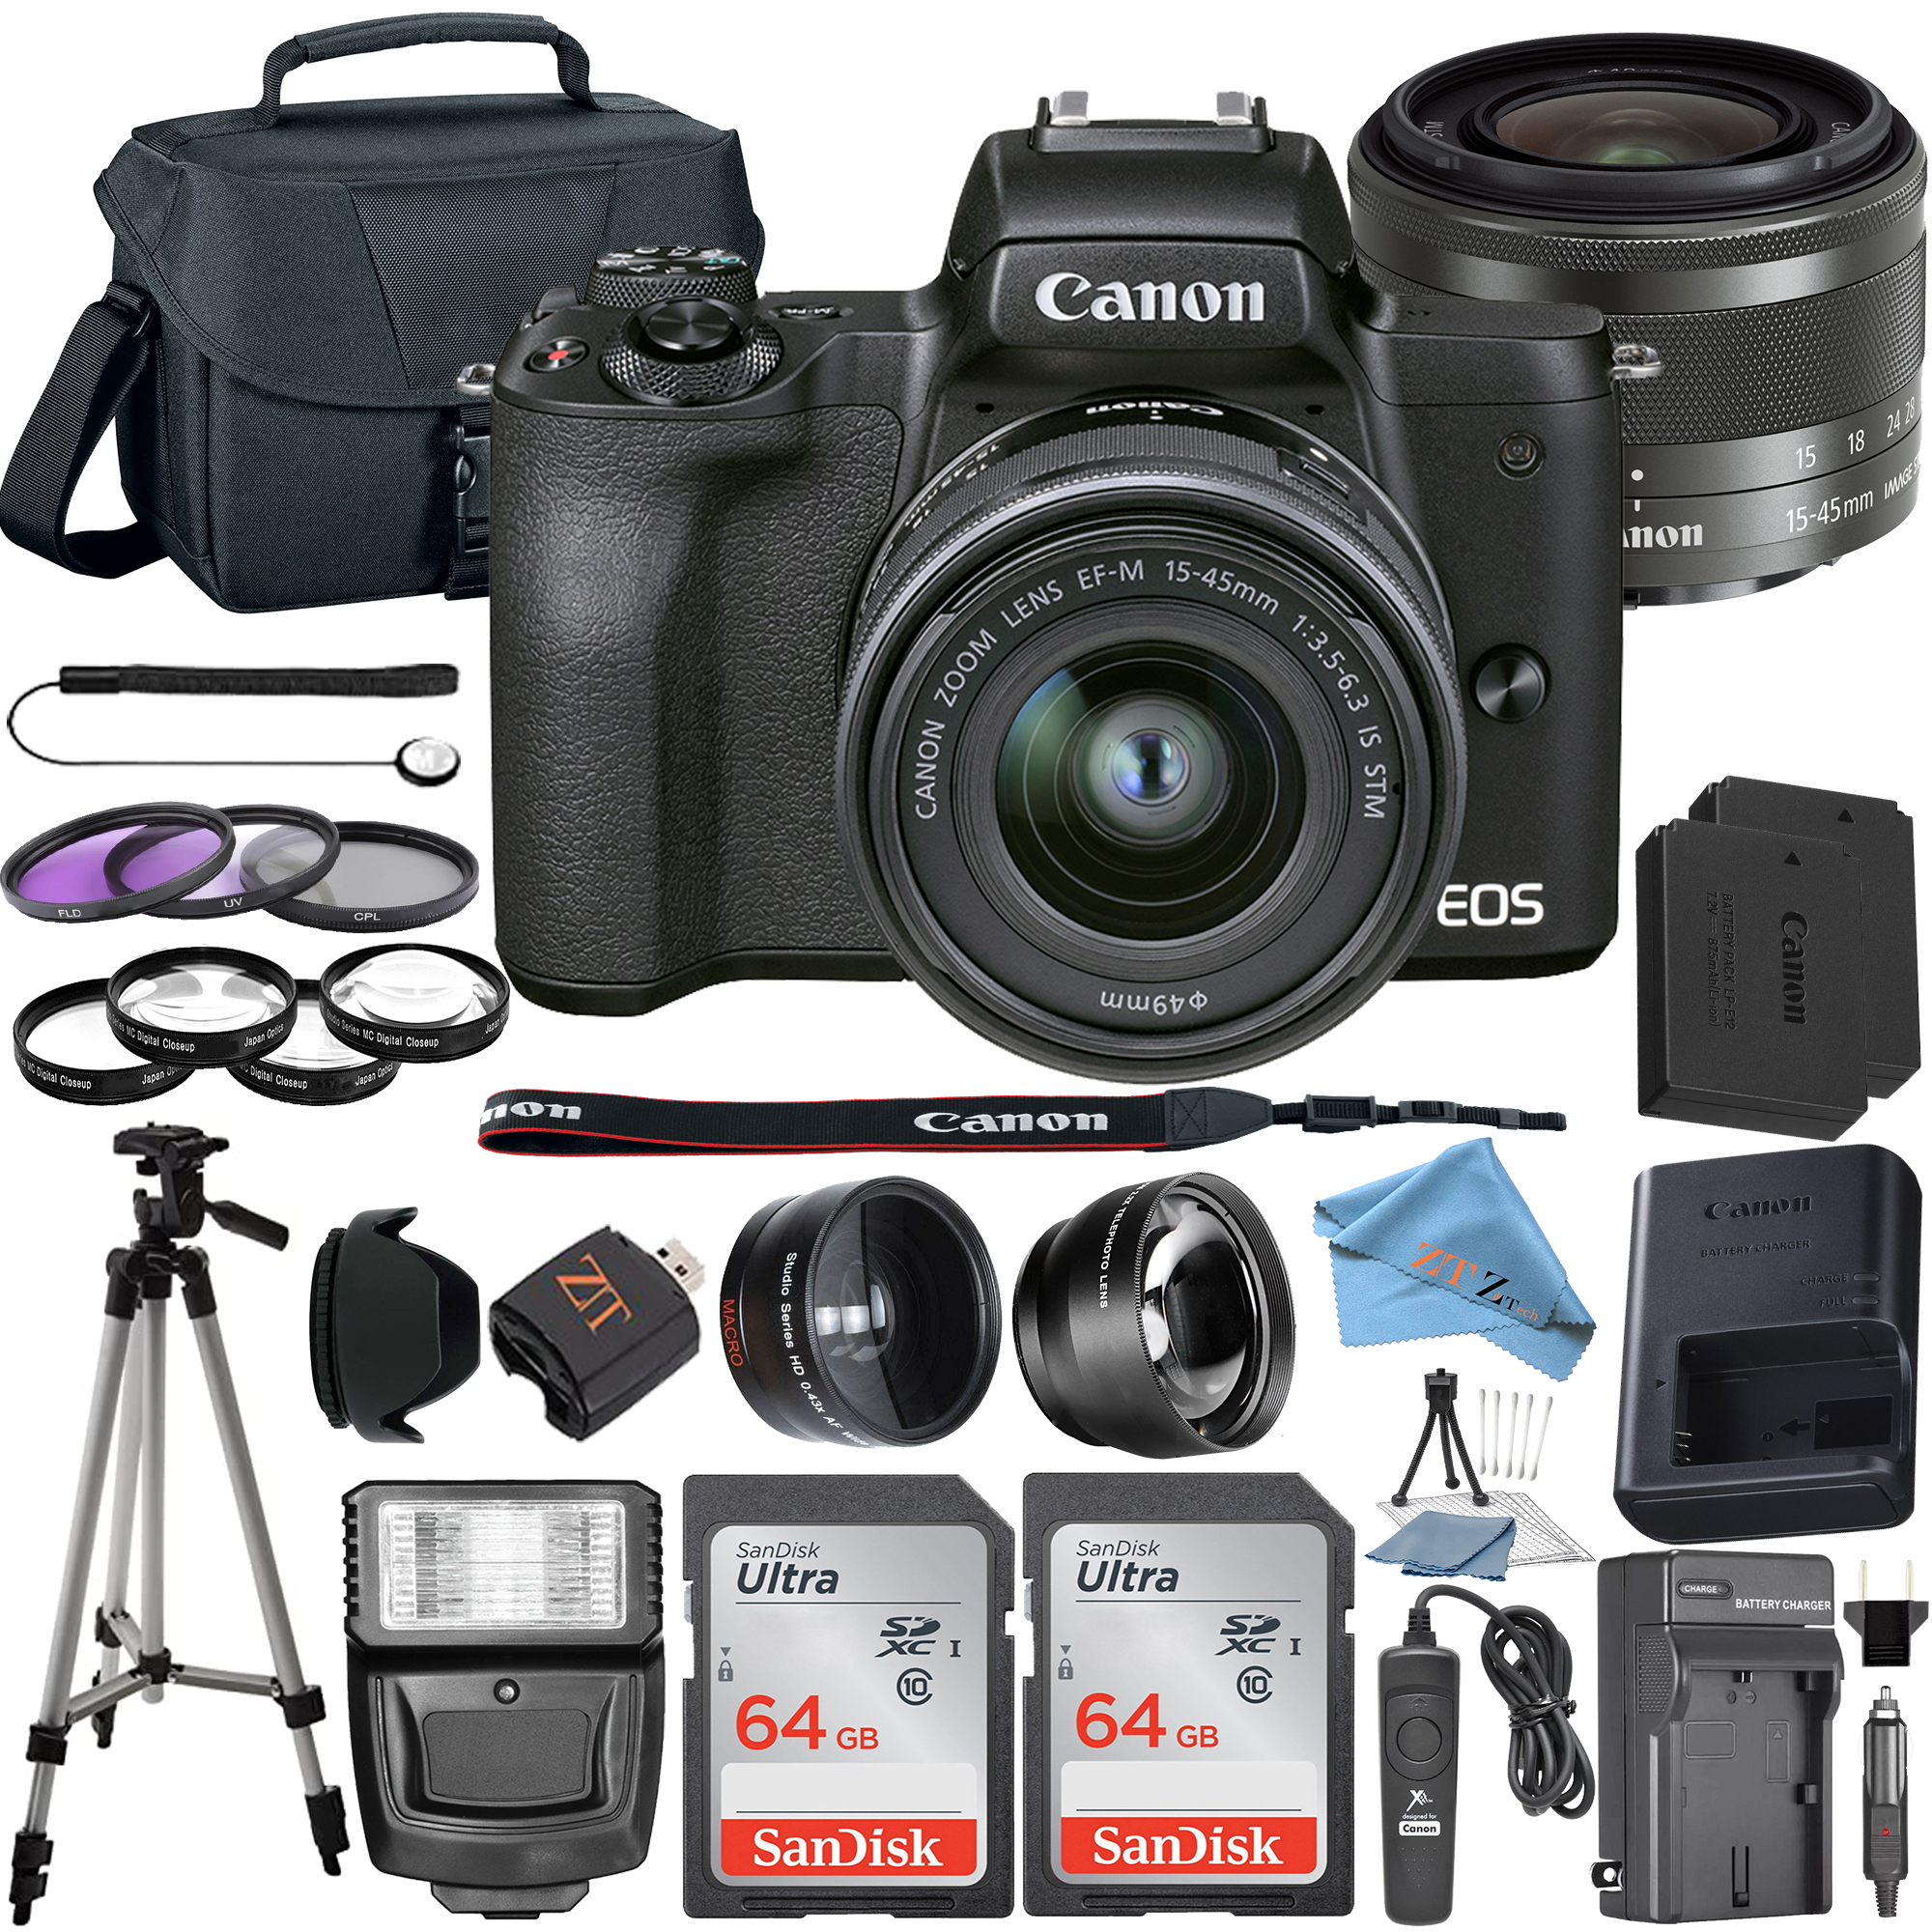 Canon EOS M50 Mark II Mirrorless Camera Bundle with 15-45mm Lens, SanDisk 64GB SanDisk Memory Card, Case, Wideangle, ZeeTech Accessory